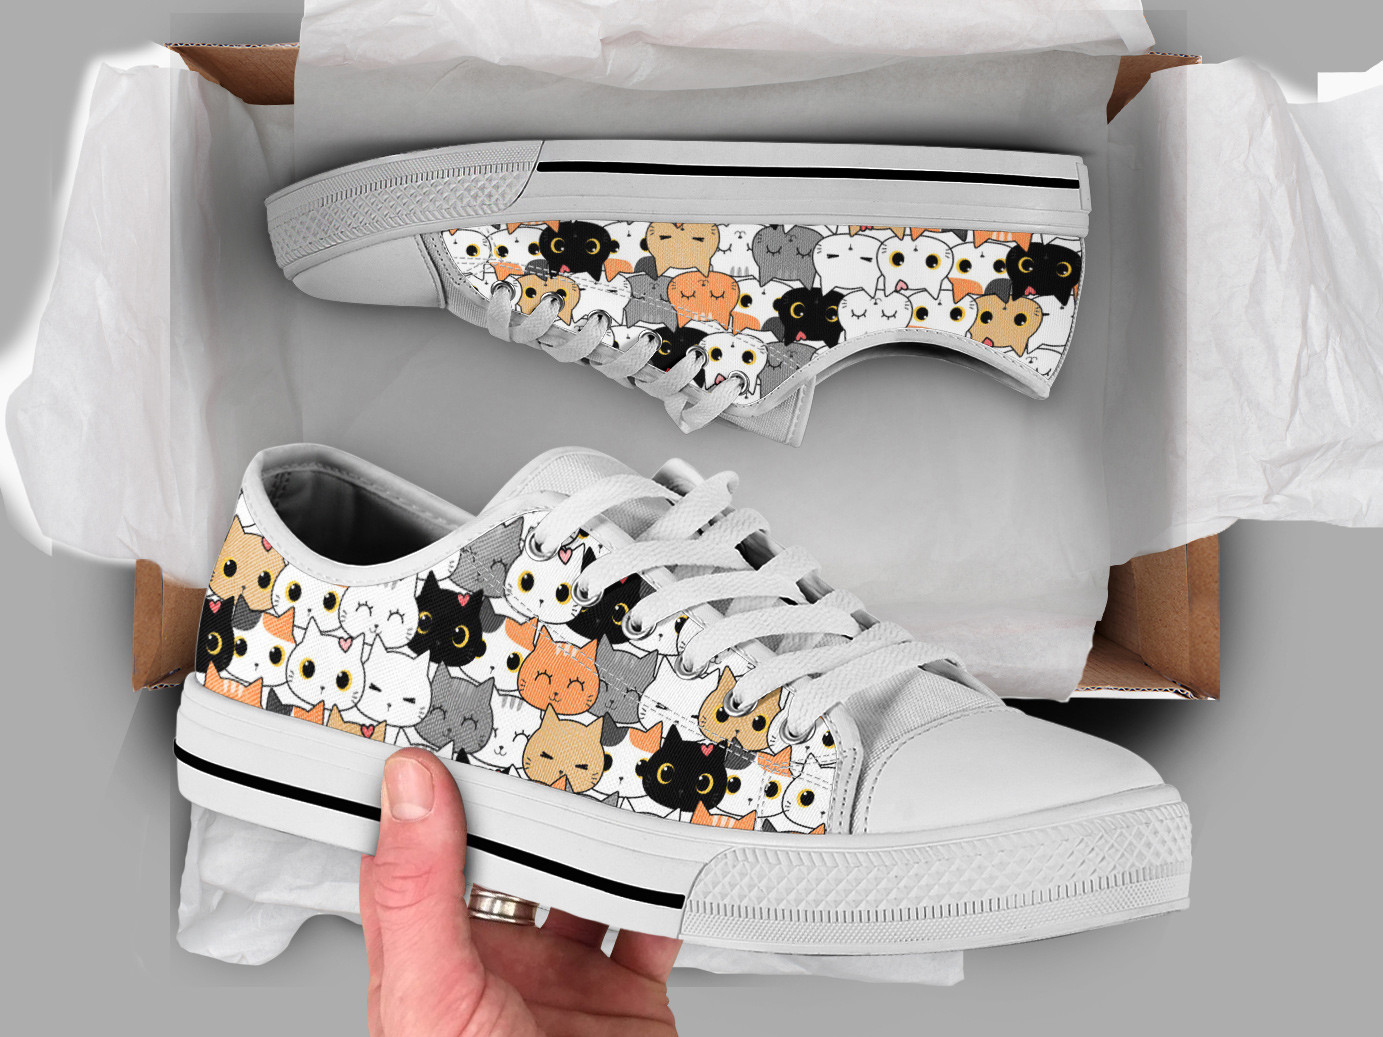 Cute Cats Printed Shoes | Custom Low Tops Sneakers For Kids & Adults